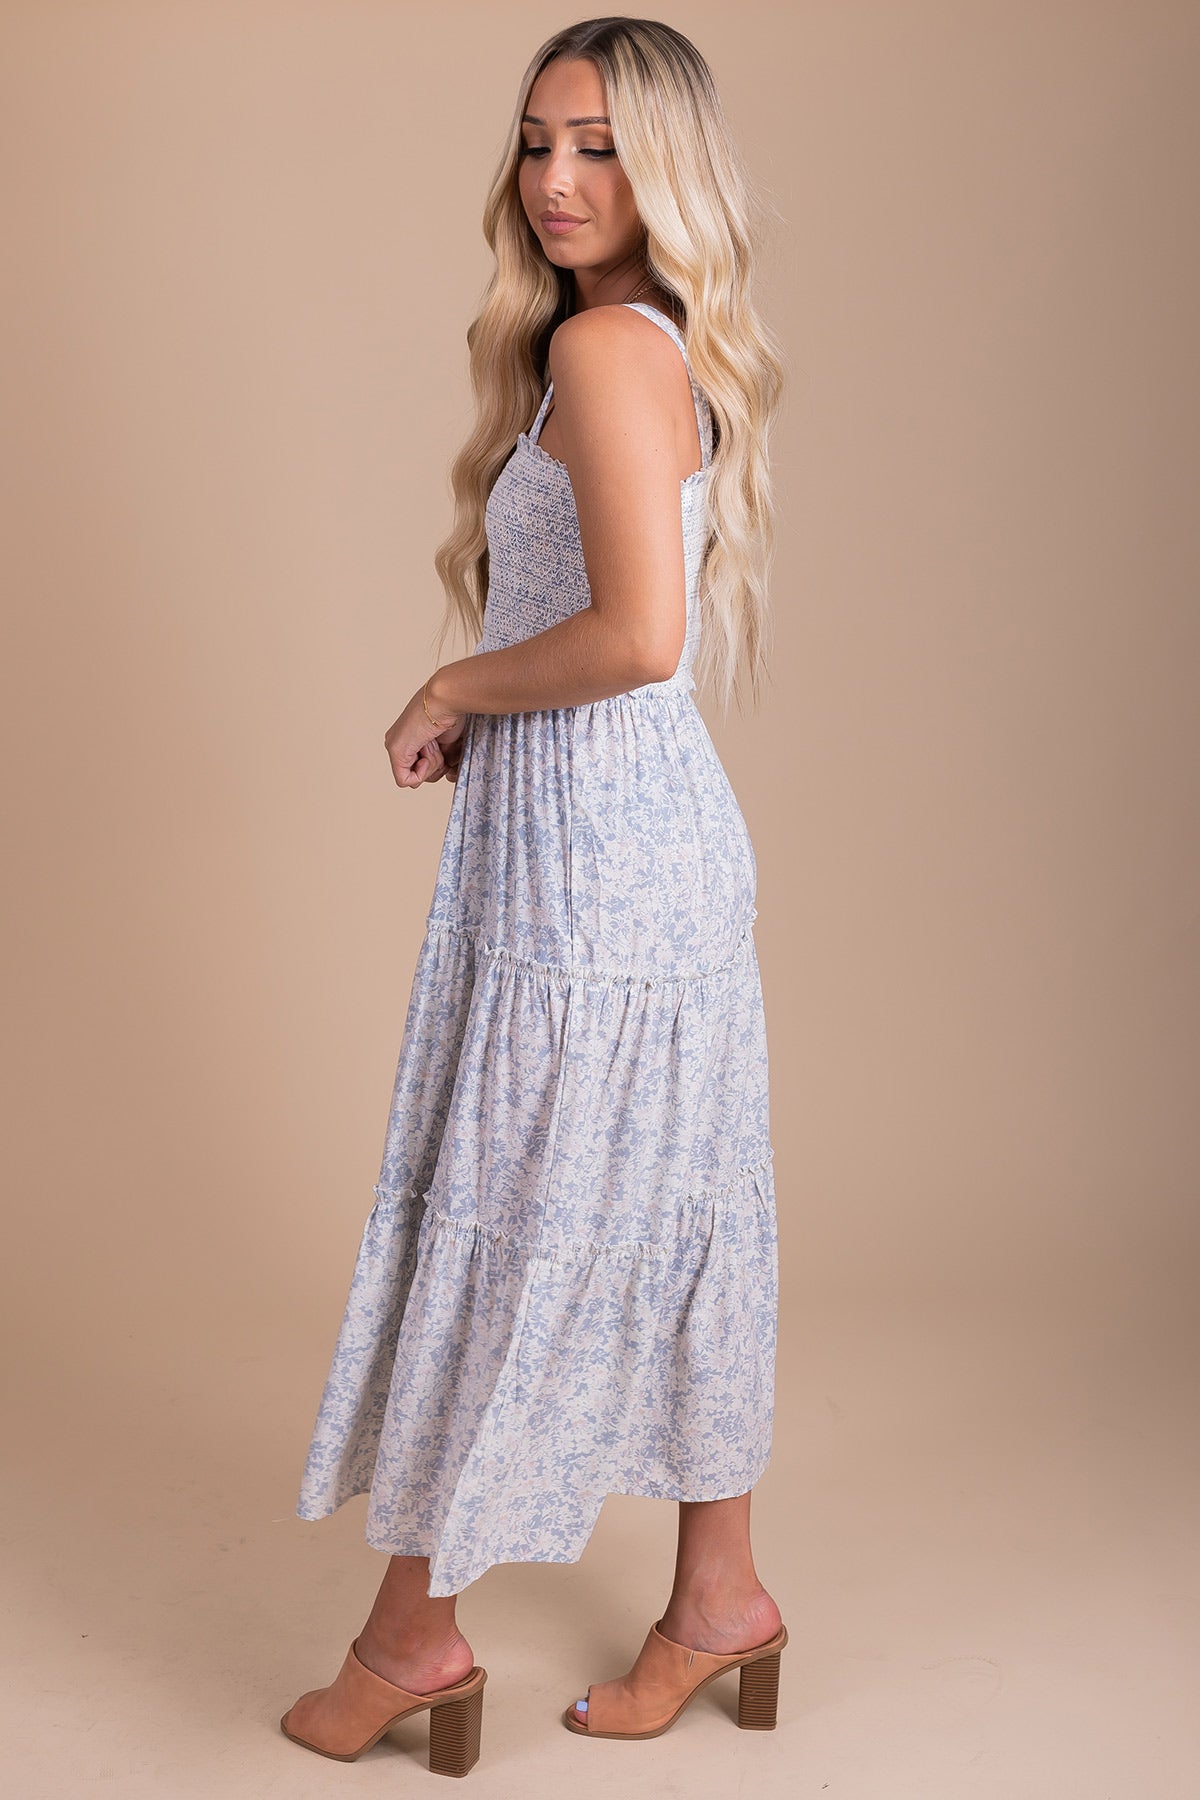 Affordable Blue and White Floral Maxi Dress for Summer